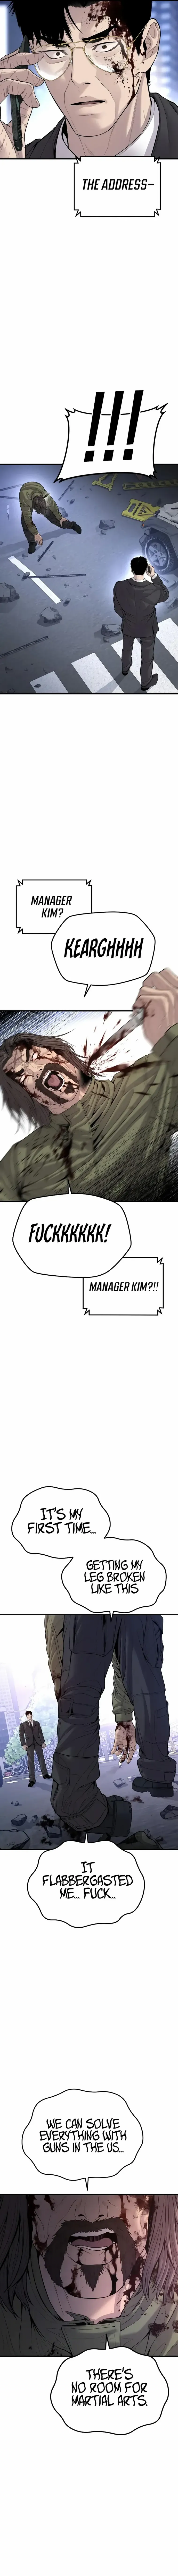 Manager Kim - Page 4